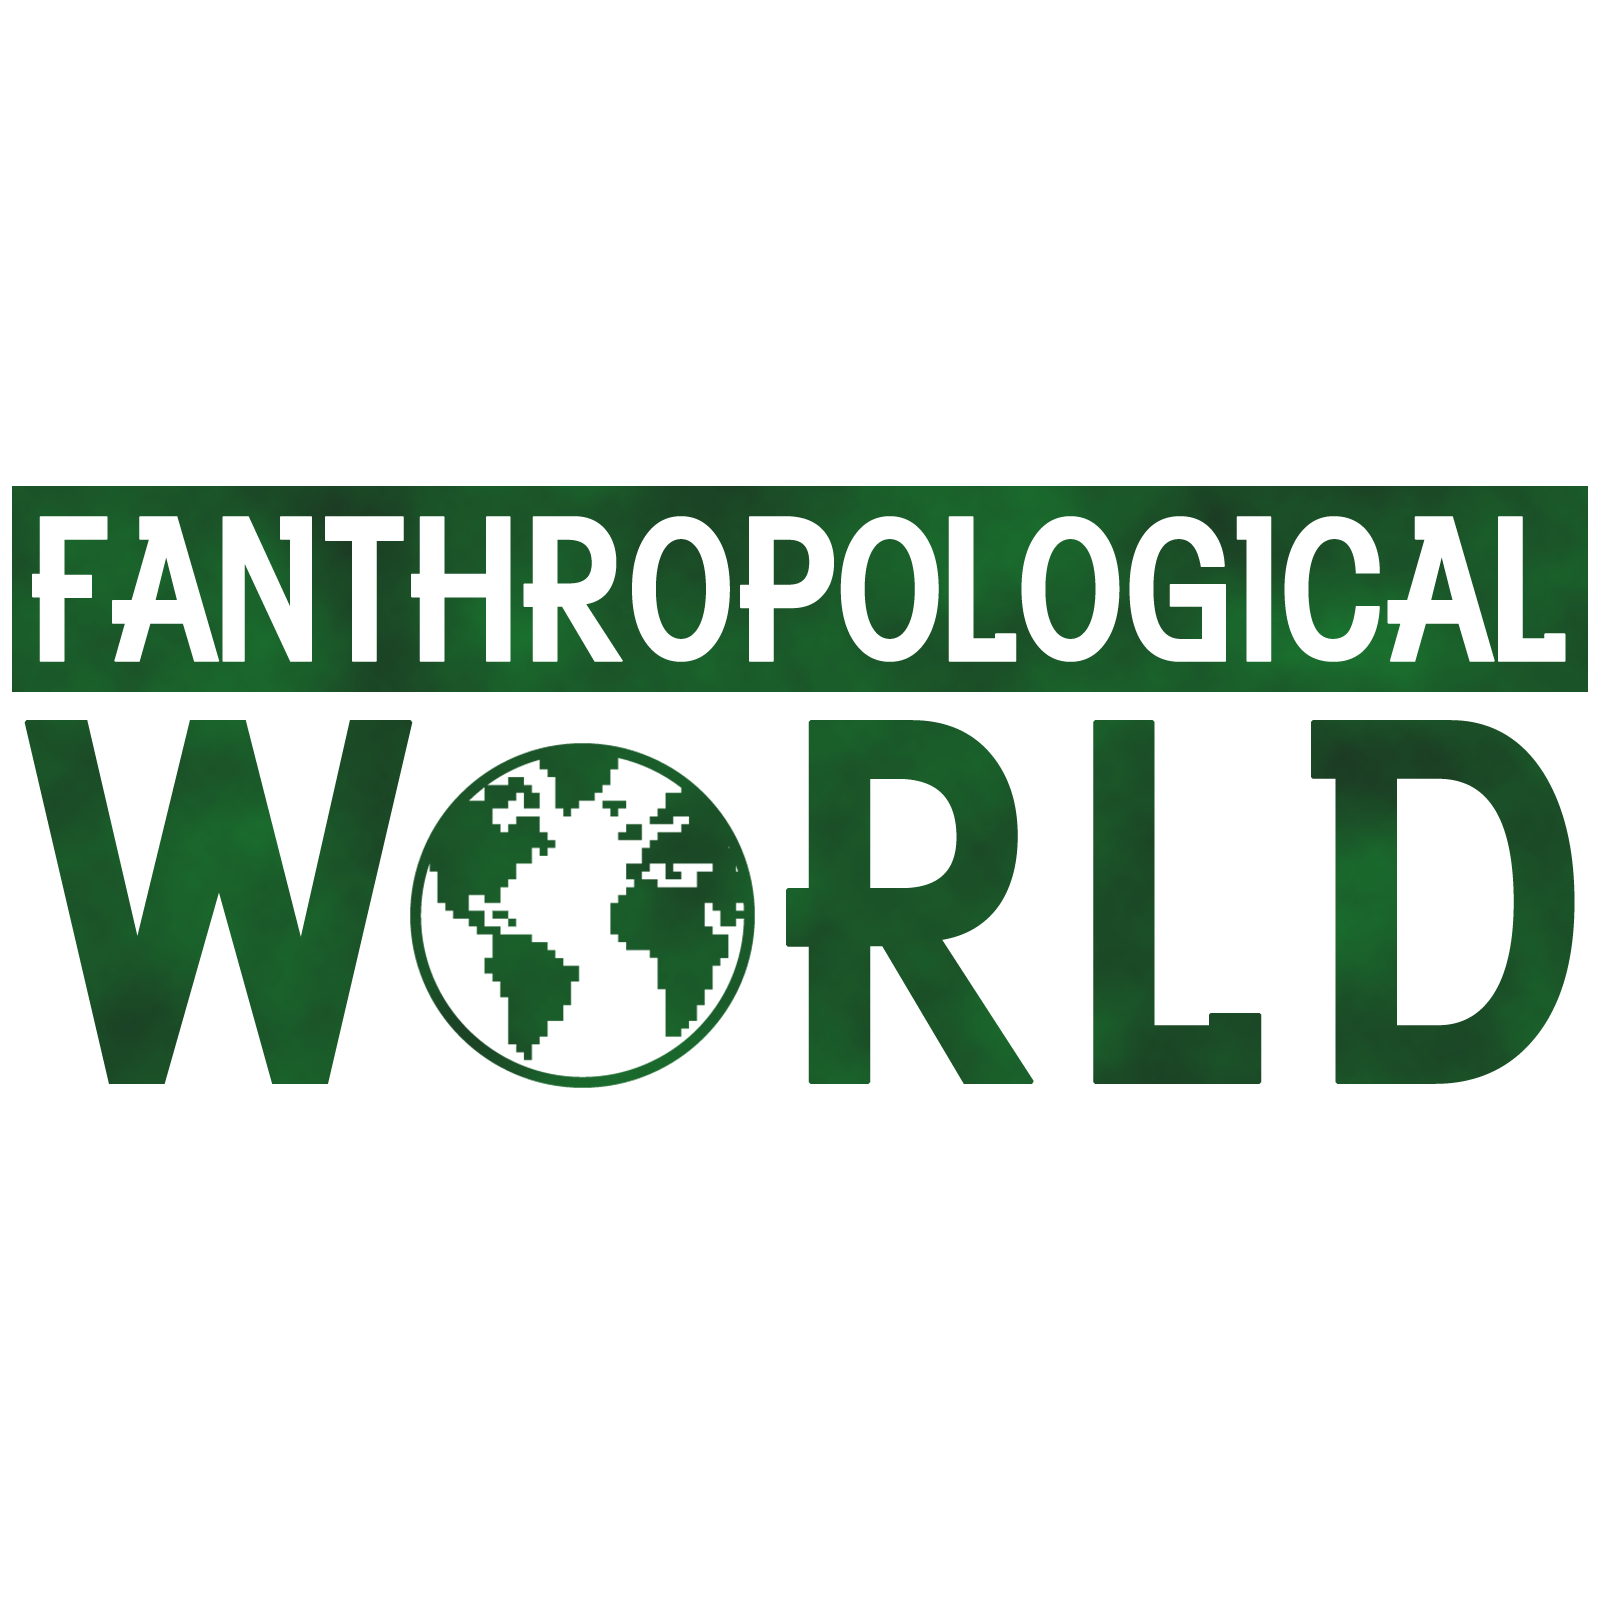 Fanthropological World - Philatelists’ Stamp of Approval!